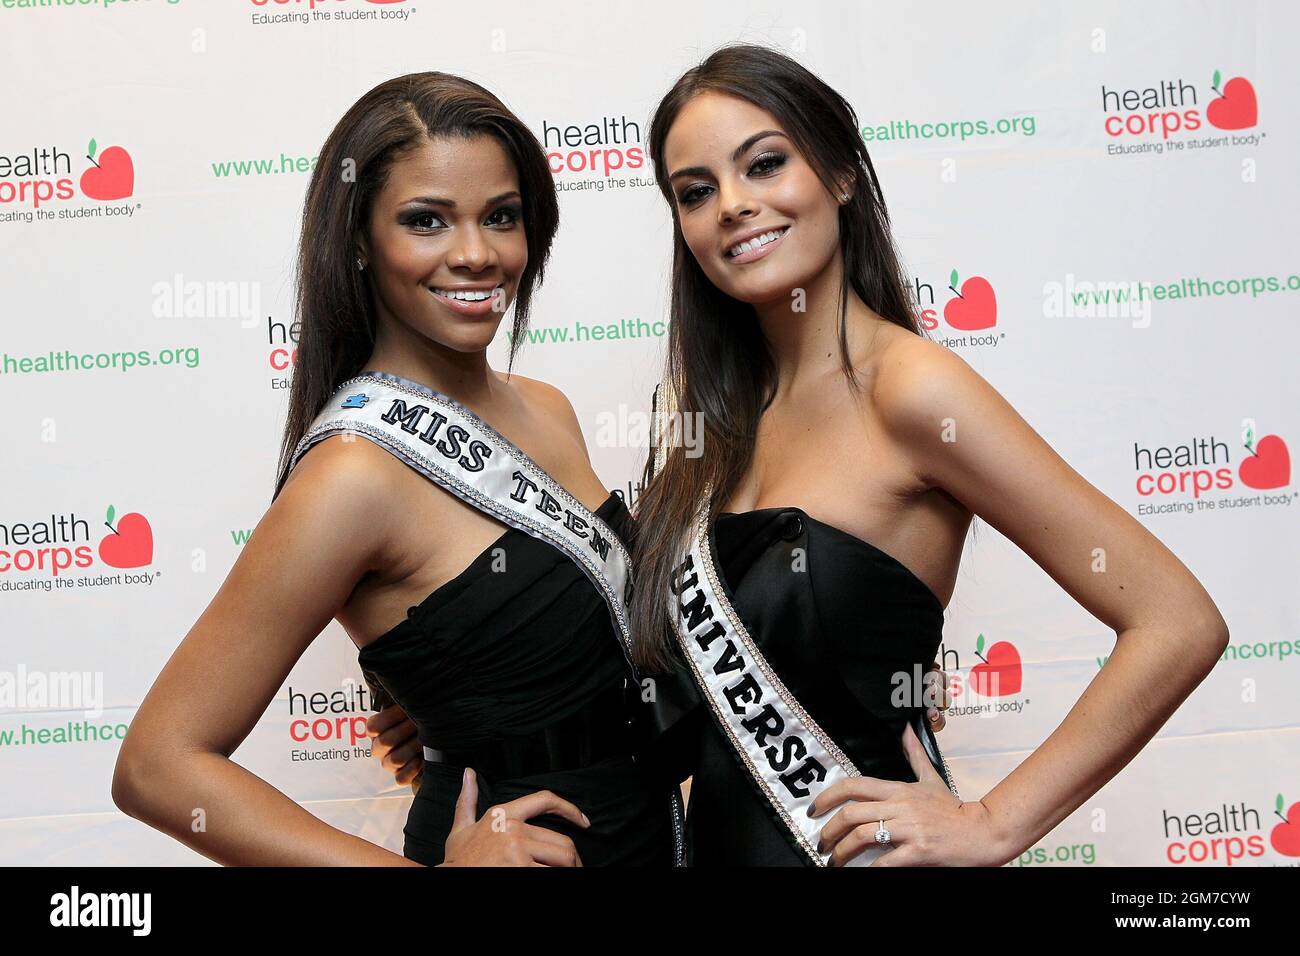 New York, NY, USA. 13 April, 2011. Miss Teen USA, Kamie Crawford, Miss Universe, Ximena Navarrete at the 2011 HealthCorps' Fresh From The Garden Gala at the Intrepid Sea-Air-Space Museum. Credit: Steve Mack/Alamy Stock Photo